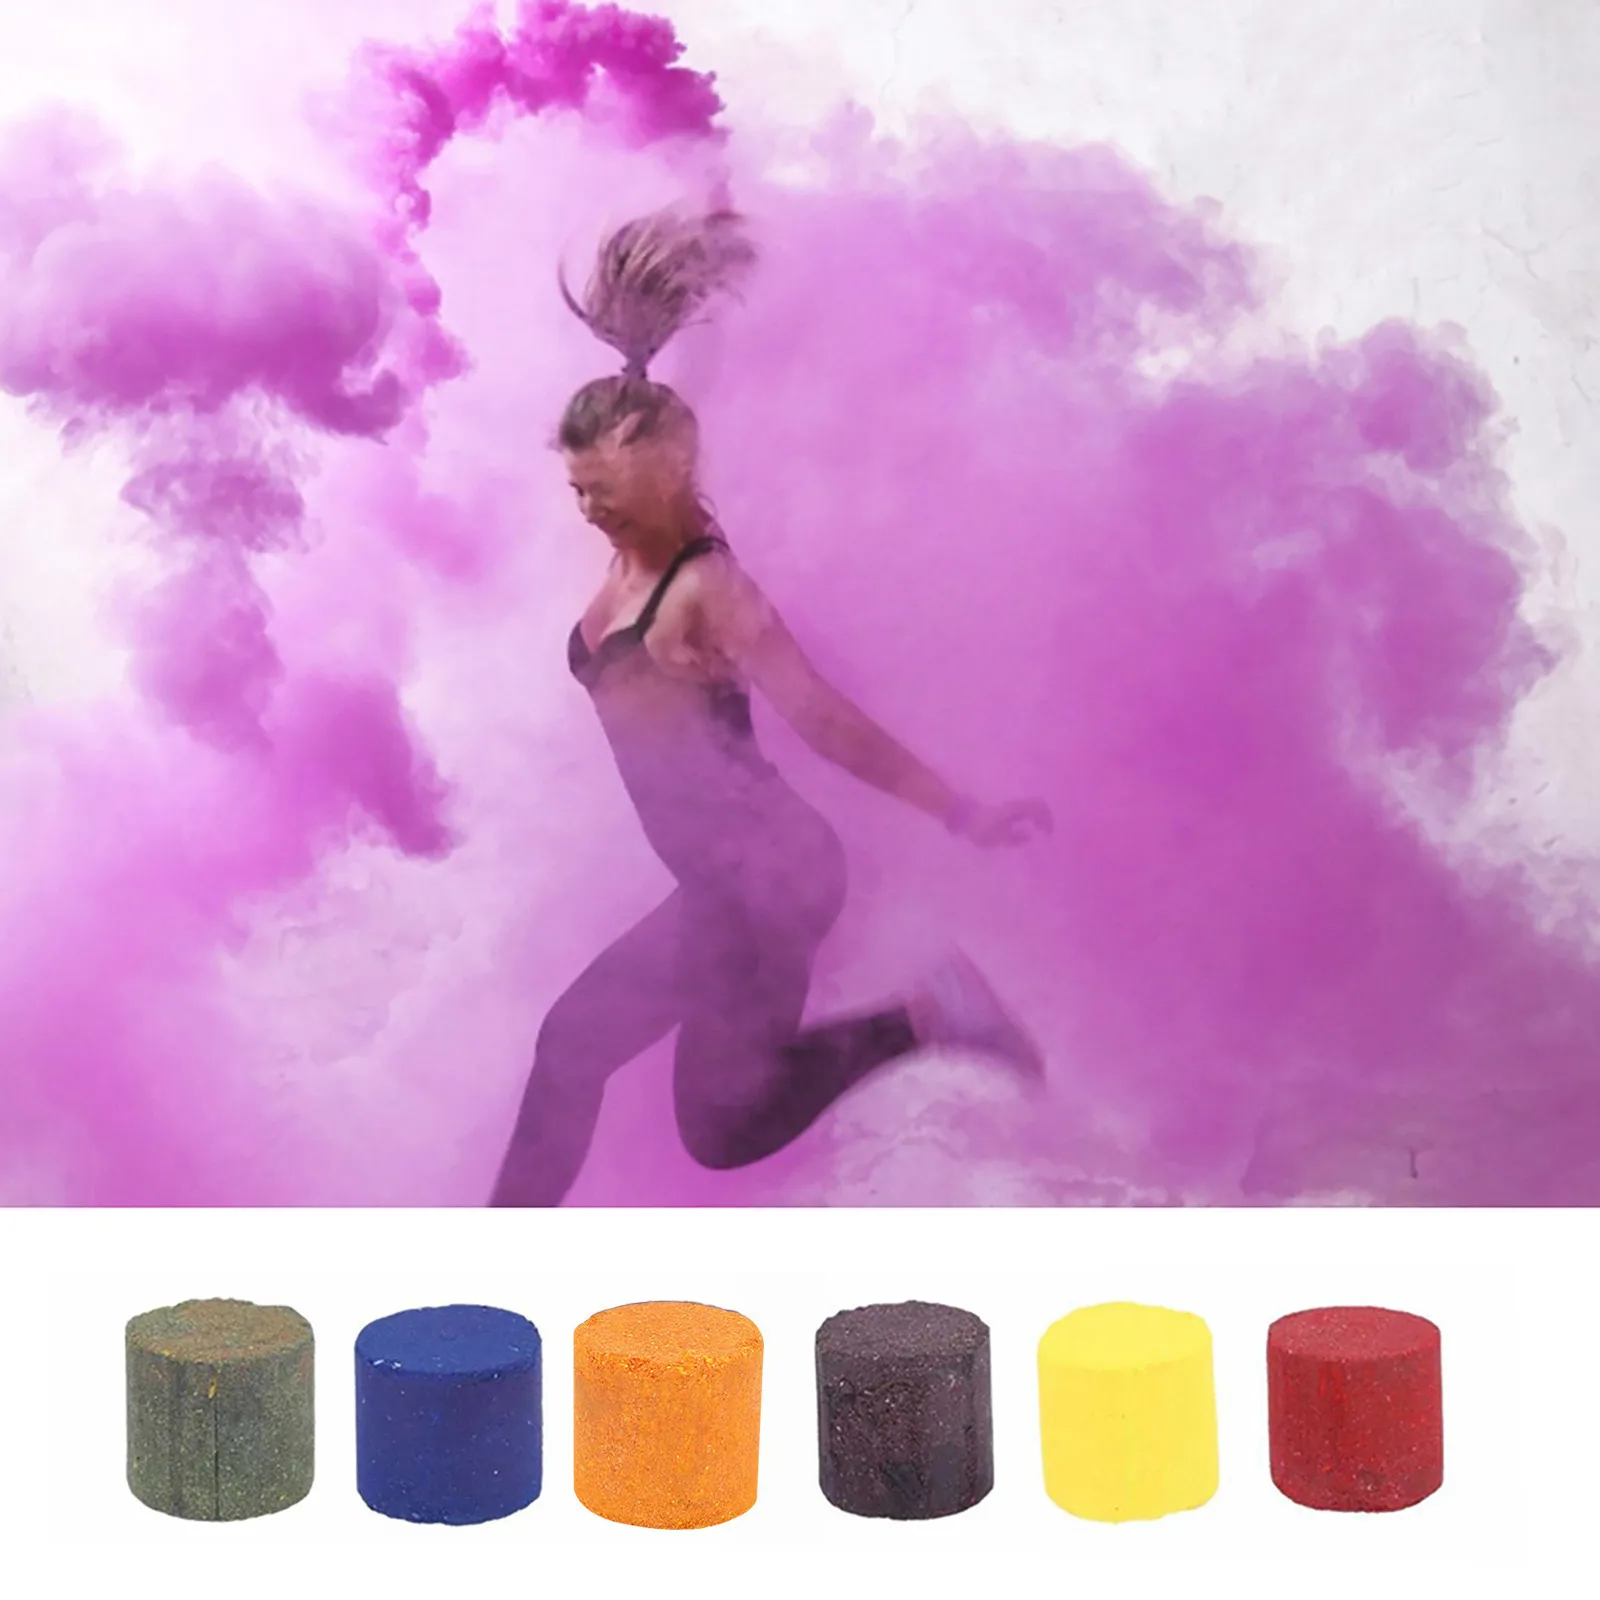 Colorful Smoke Cake Effect Show Round Bomb Photography Aid MV Videos Toy Gifts 